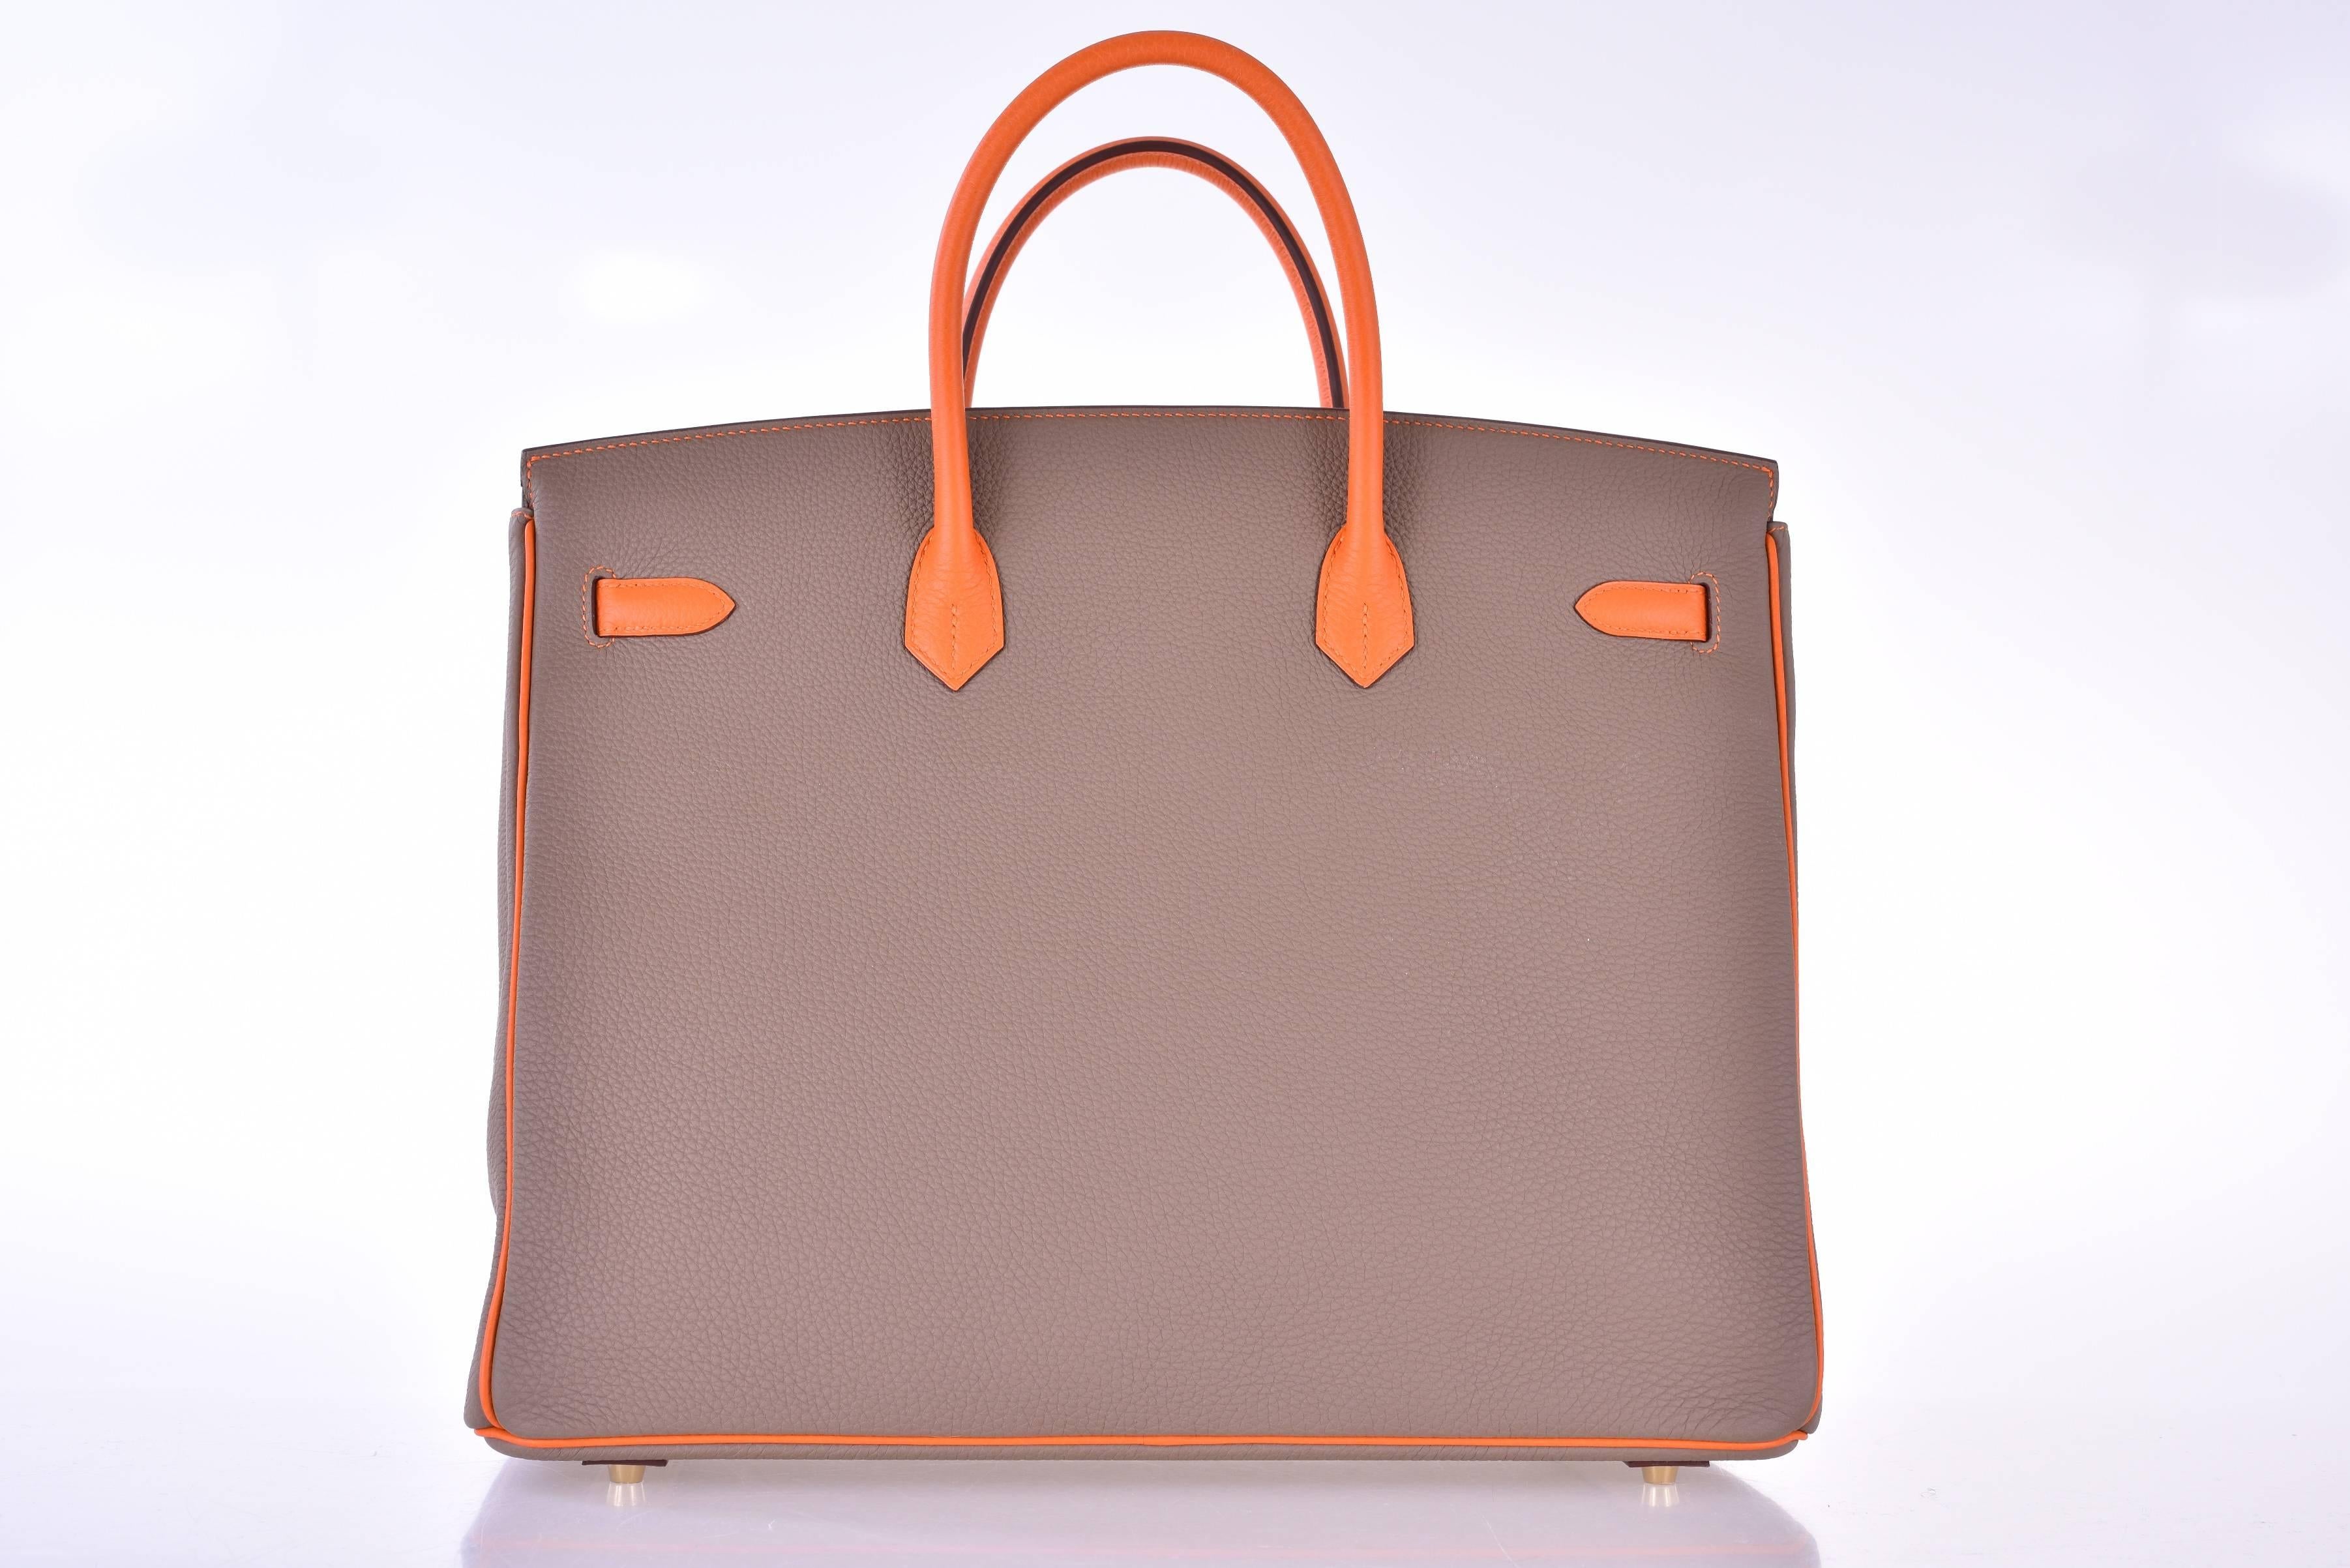 Very Special Hermes 40cm Etoupe and orange HSS Birkin Bag with Gold Hardware. 

New 
This Bag Measures: 15.75 (40.5cm) Length x 11in (28cm) Height x 5.5in (14cm) Depth

This 40cm Birkin bag by Hermès in Etoupe with orange interior and piping.